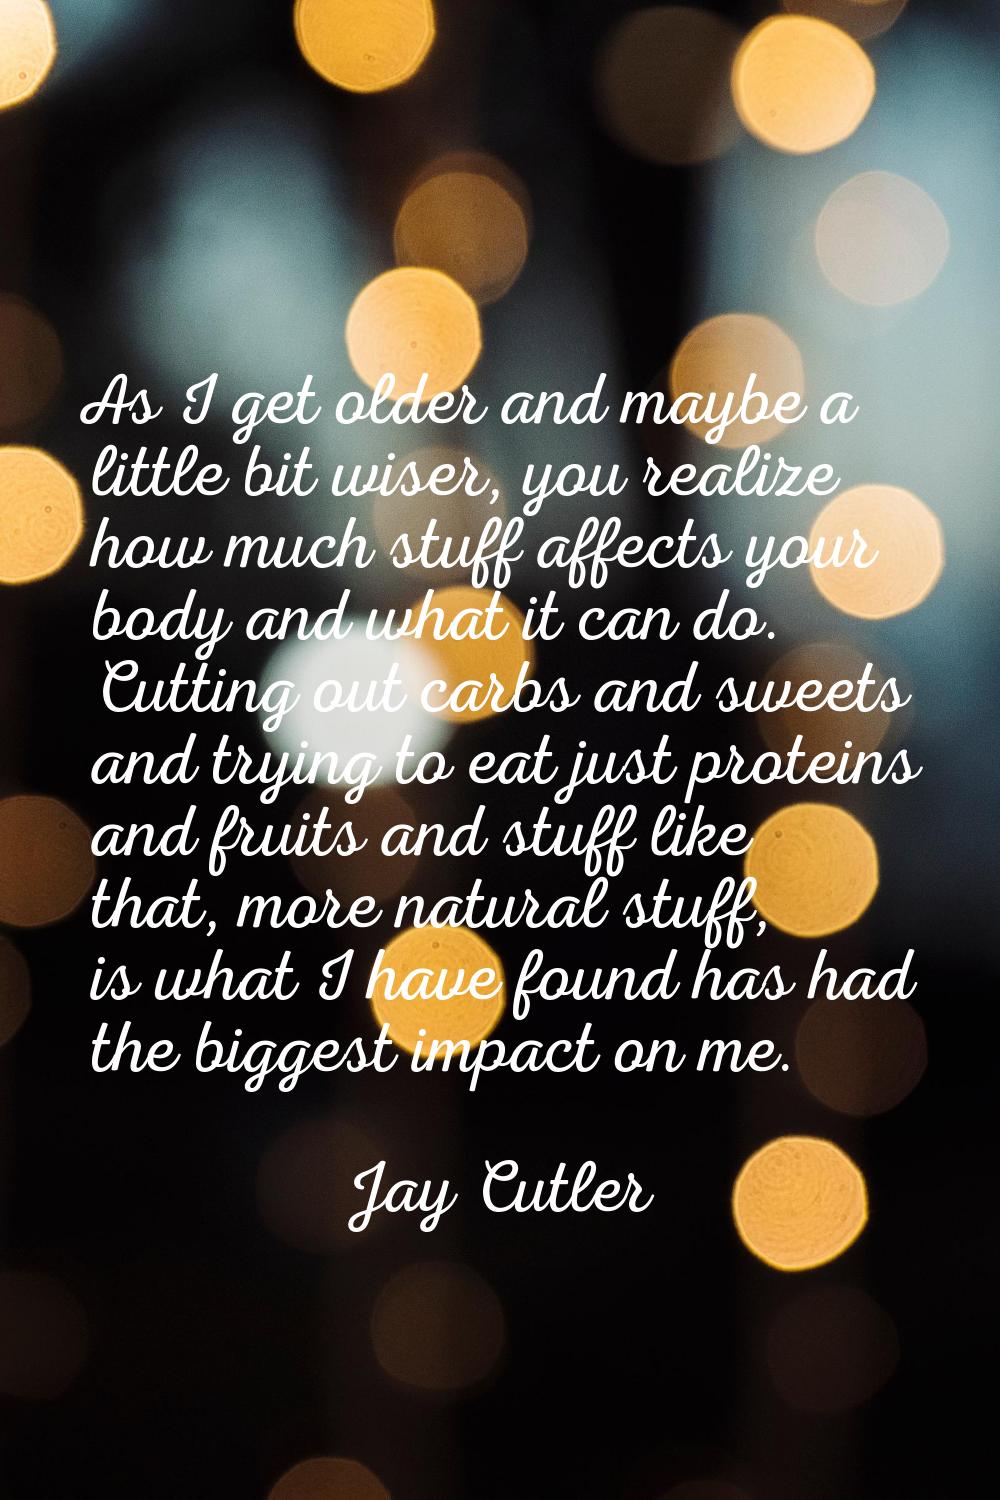 As I get older and maybe a little bit wiser, you realize how much stuff affects your body and what 